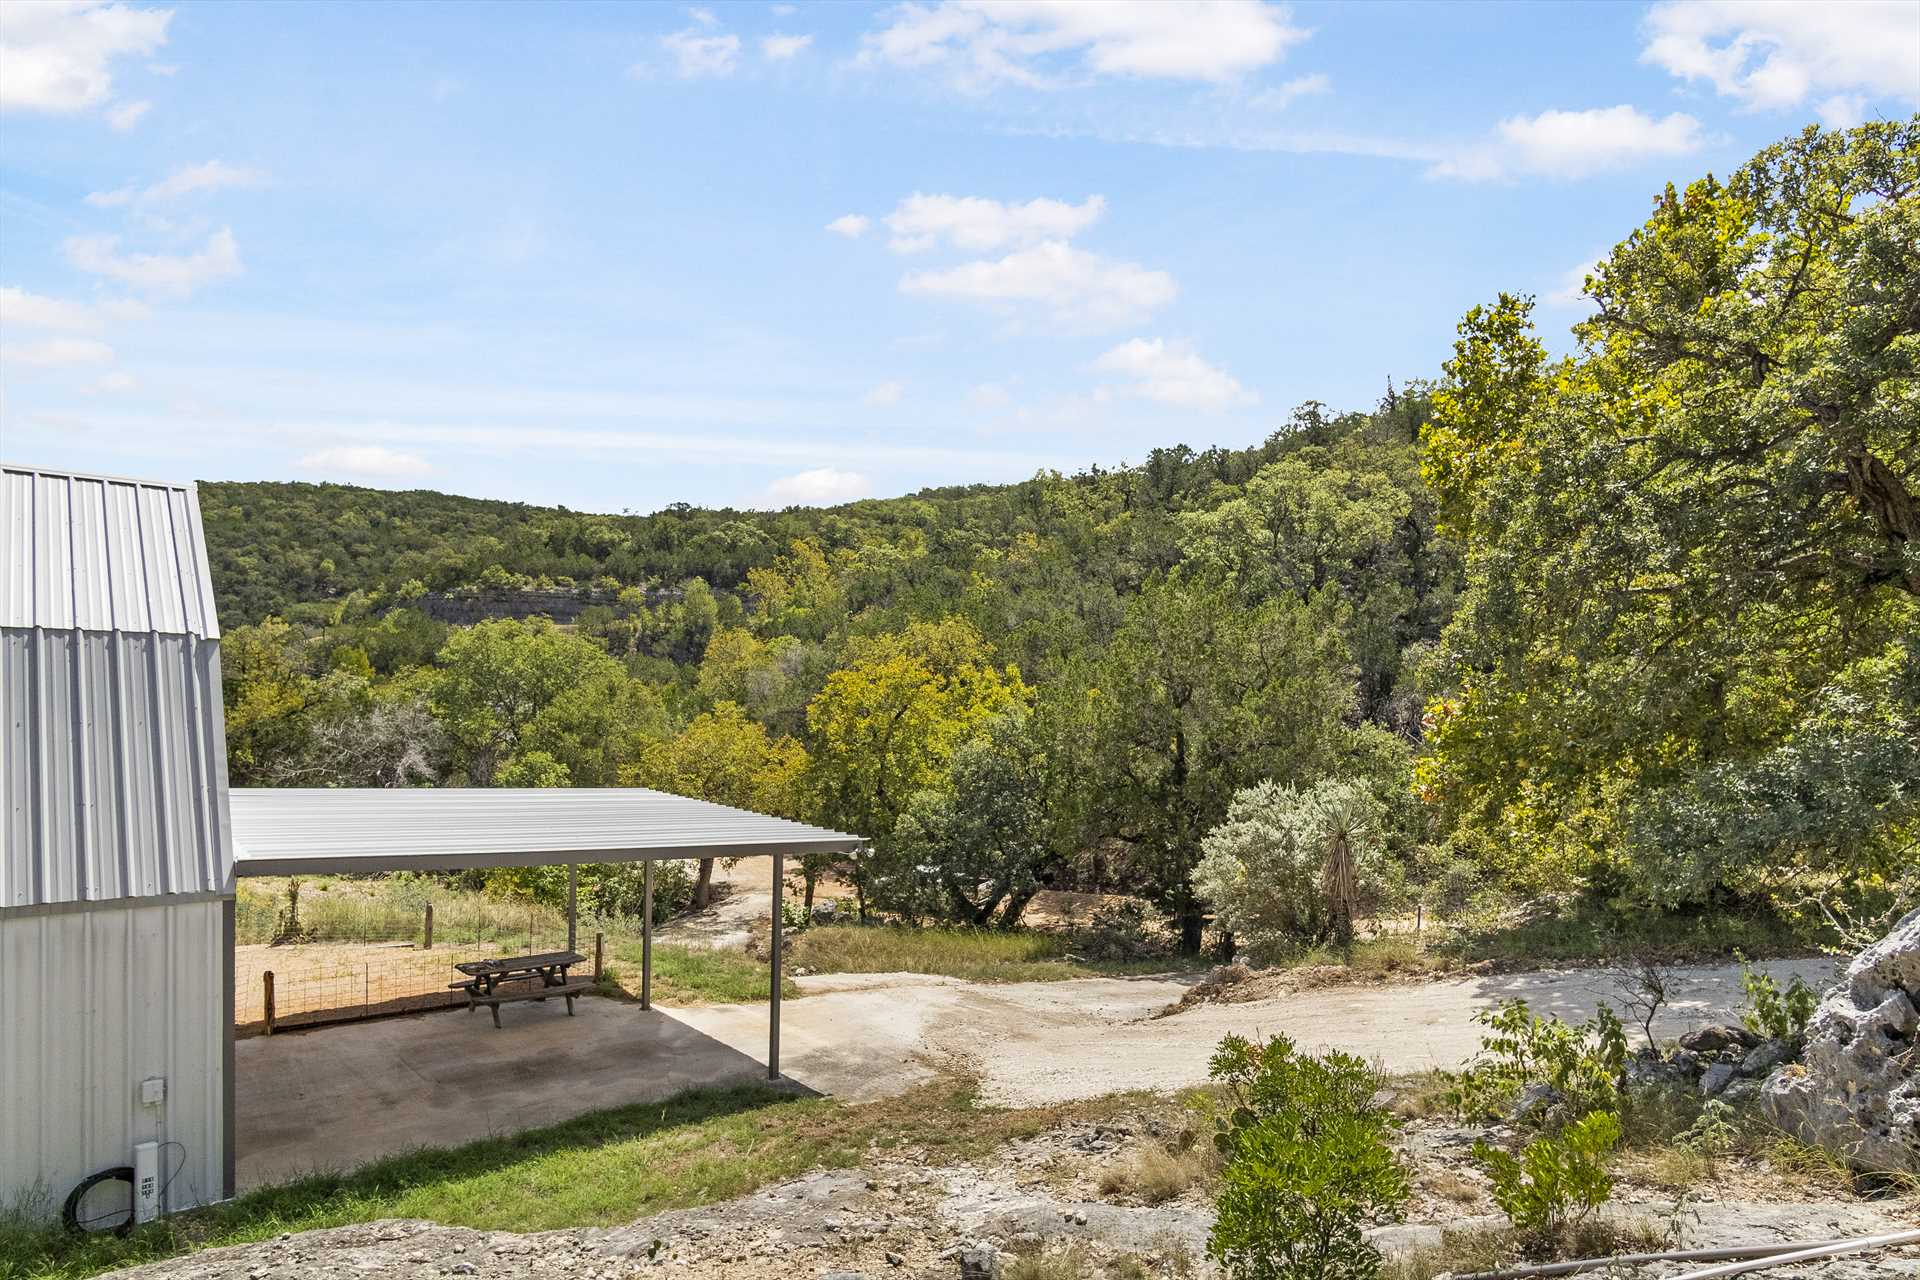                                                 The Hawk's Nest has a lofty perch high in the Hill Country, and with 63 acres of land, there are stunning views you won't find anywhere else!